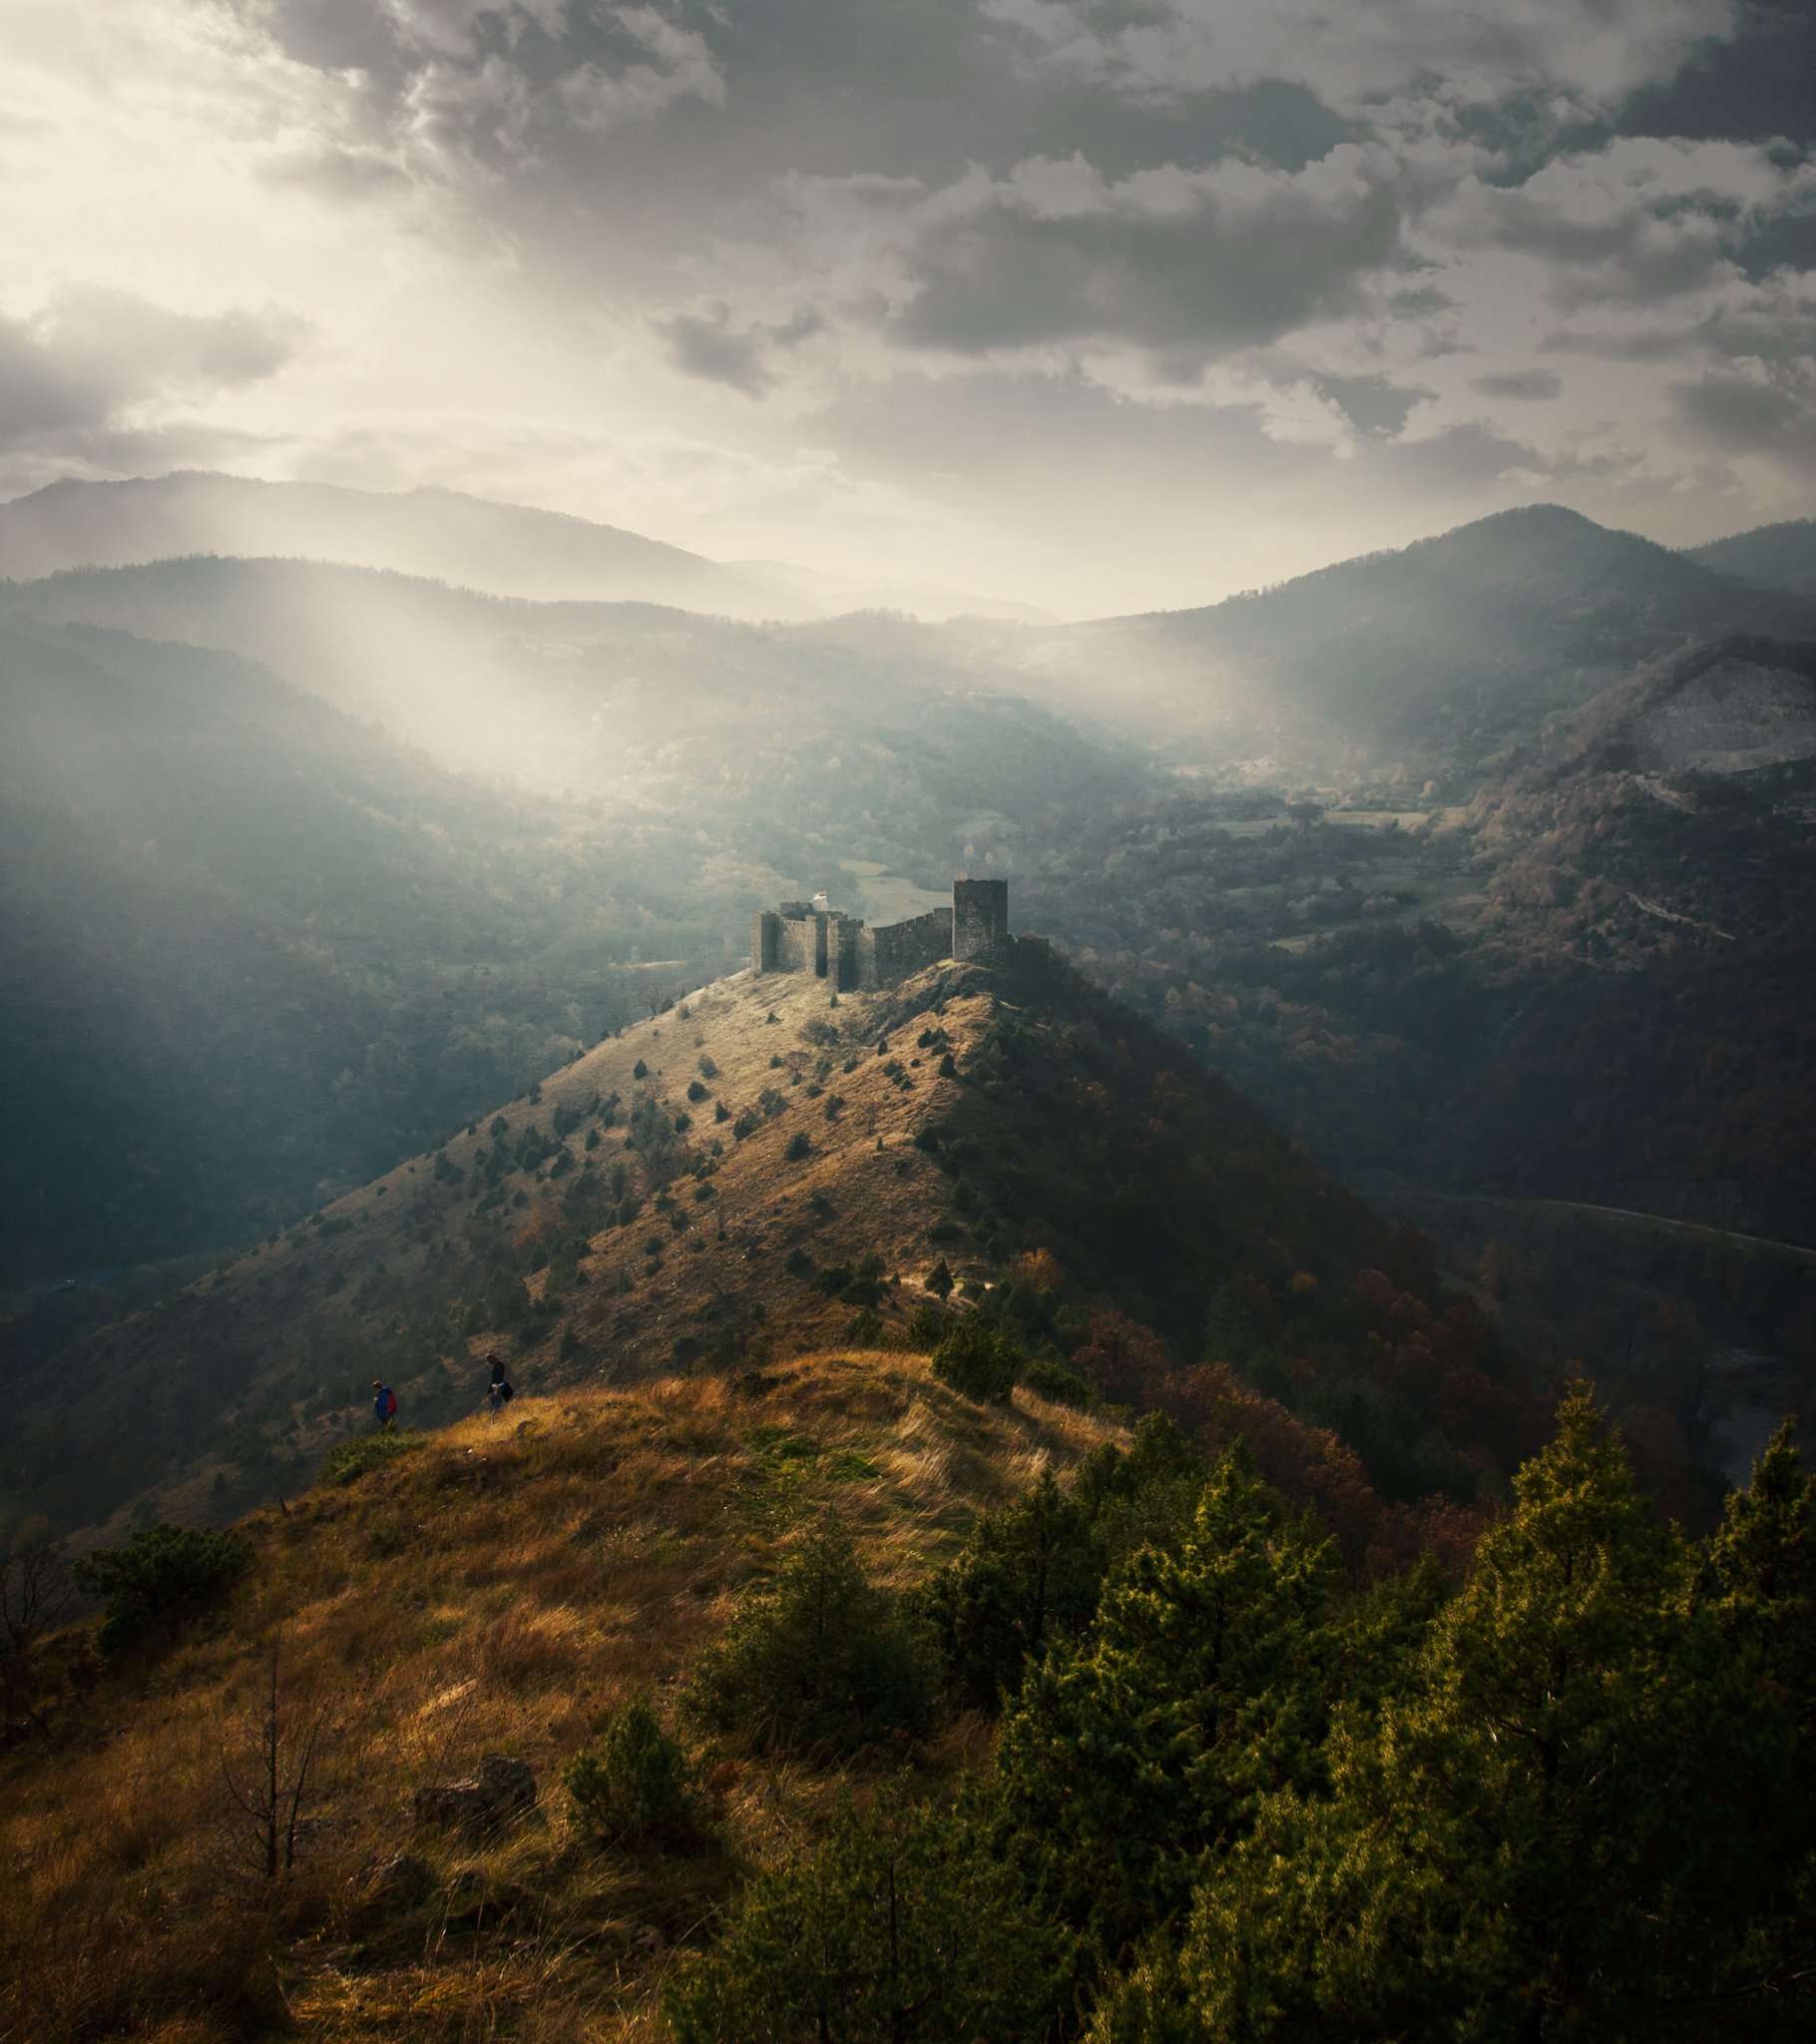 fortress, serbia, balkan, people, travel, landscape, mountains, clouds, ancient, ruins, city fortress, old, rustic, maglic, building, history, era, defence, slope, isolated, alone, walking, hike, explore, exploration, nature, medieval,, Марко Радовановић